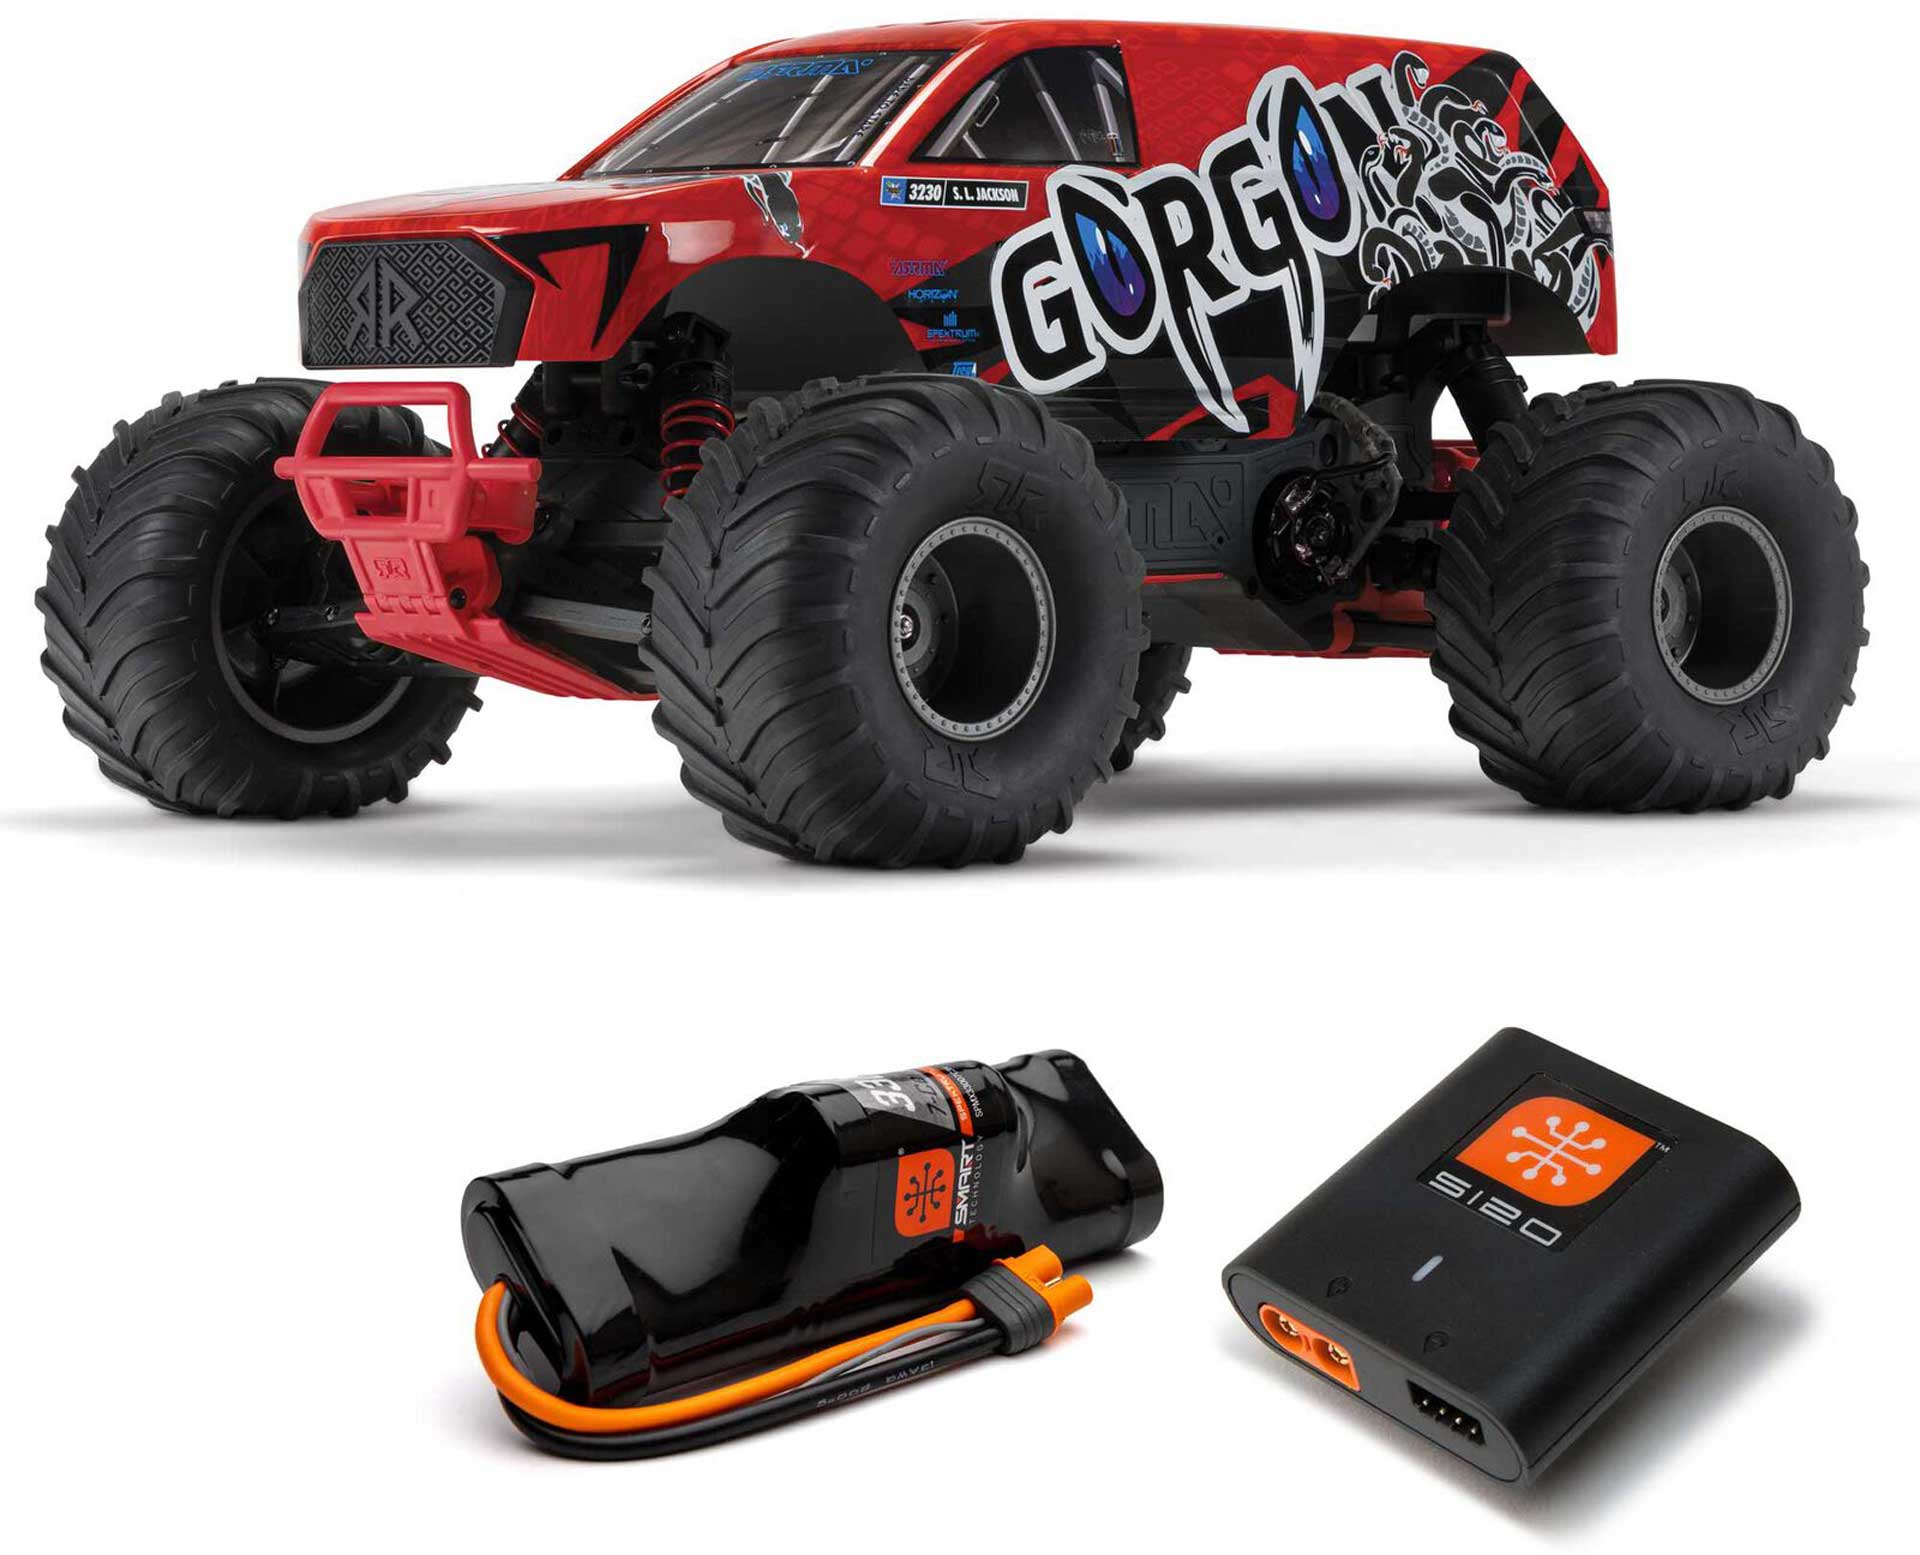 ARRMA 1/10 GORGON 4X2 MEGA 550 Brushed Monster Truck RTR Red with battery and charger